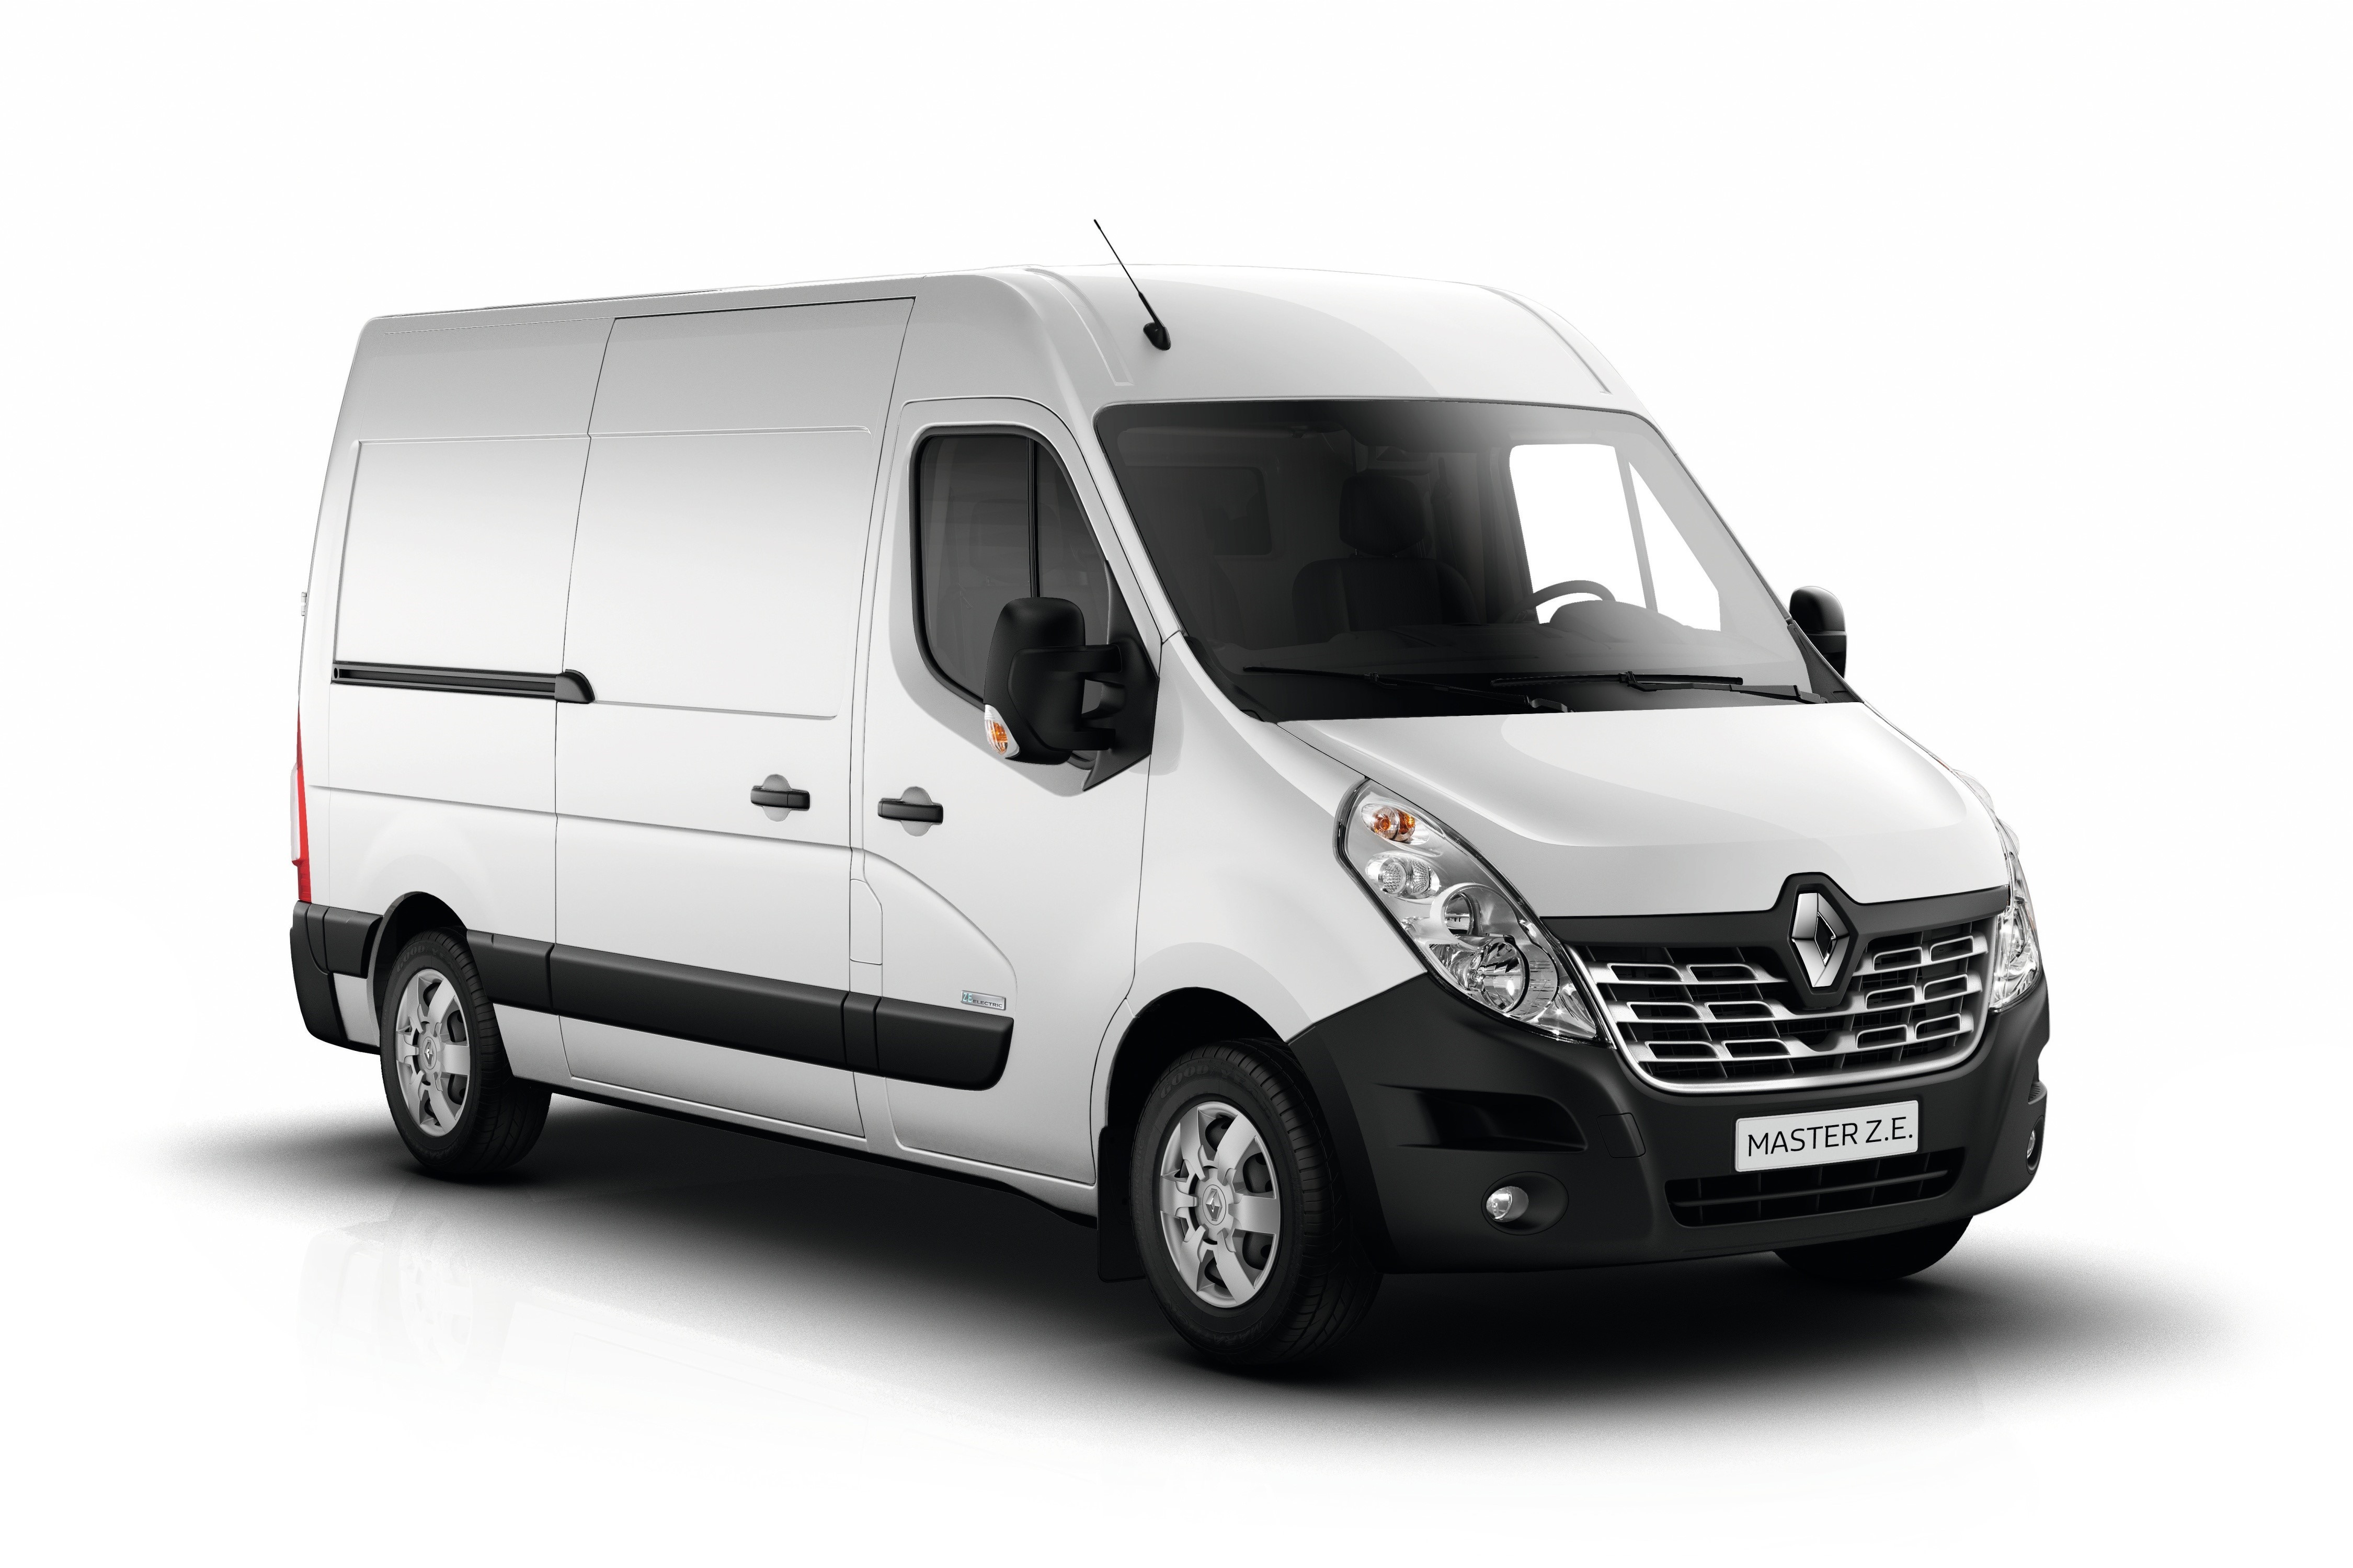 Renault Master Z.E. best specifications